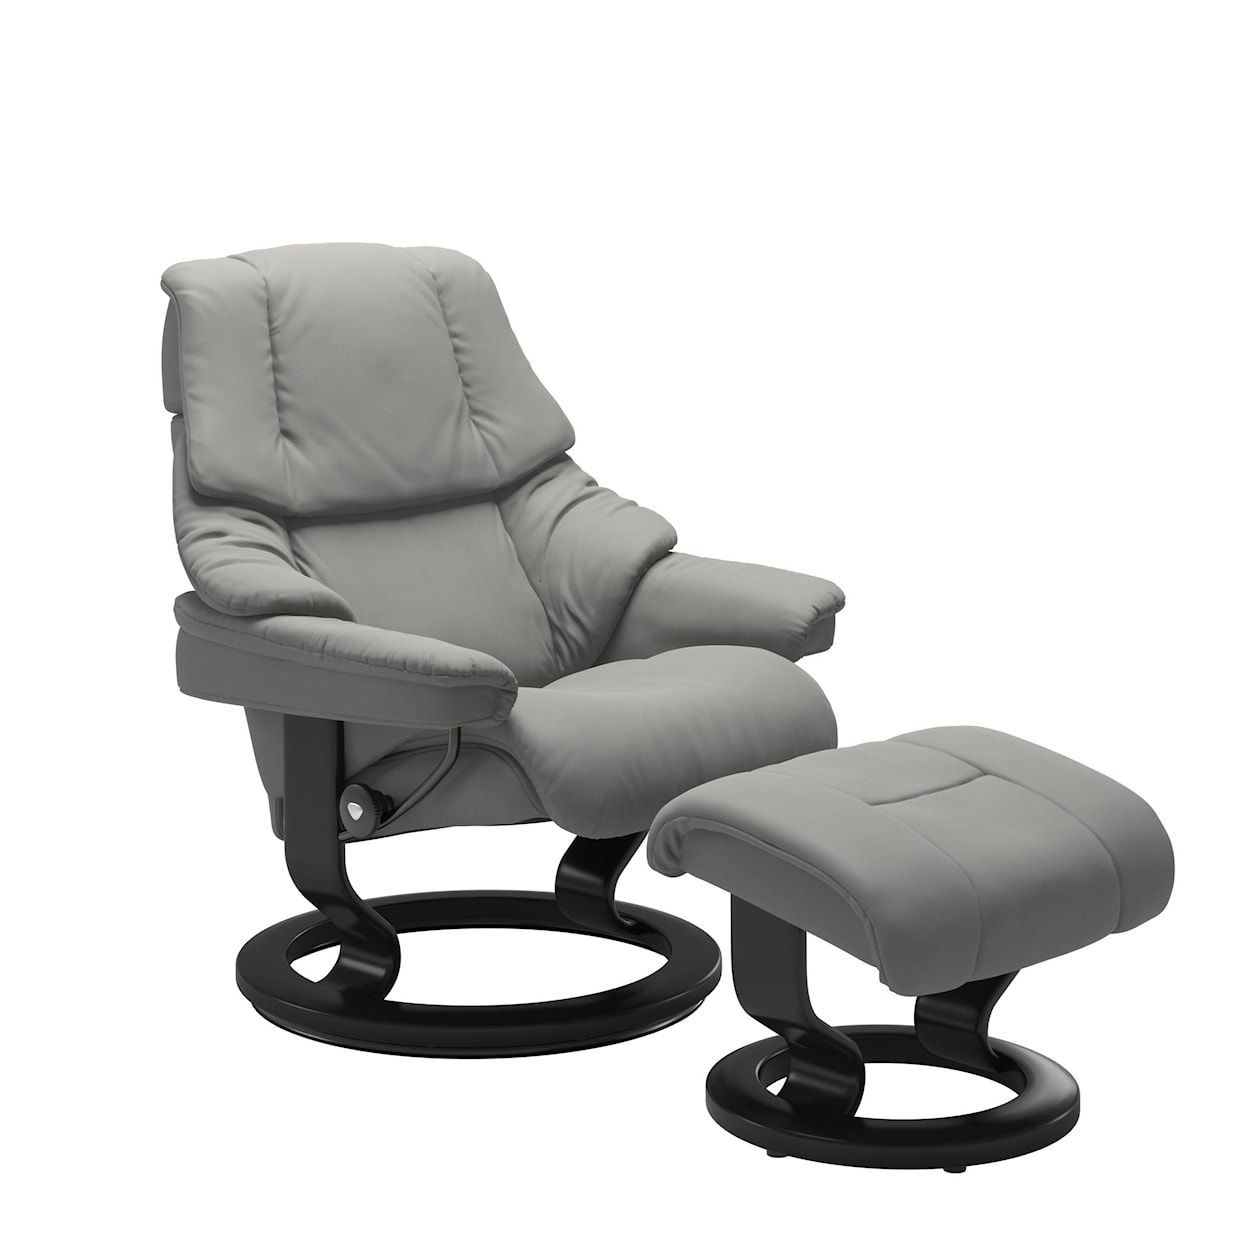 Stressless by Ekornes Reno Large Reclining Chair with Classic Base